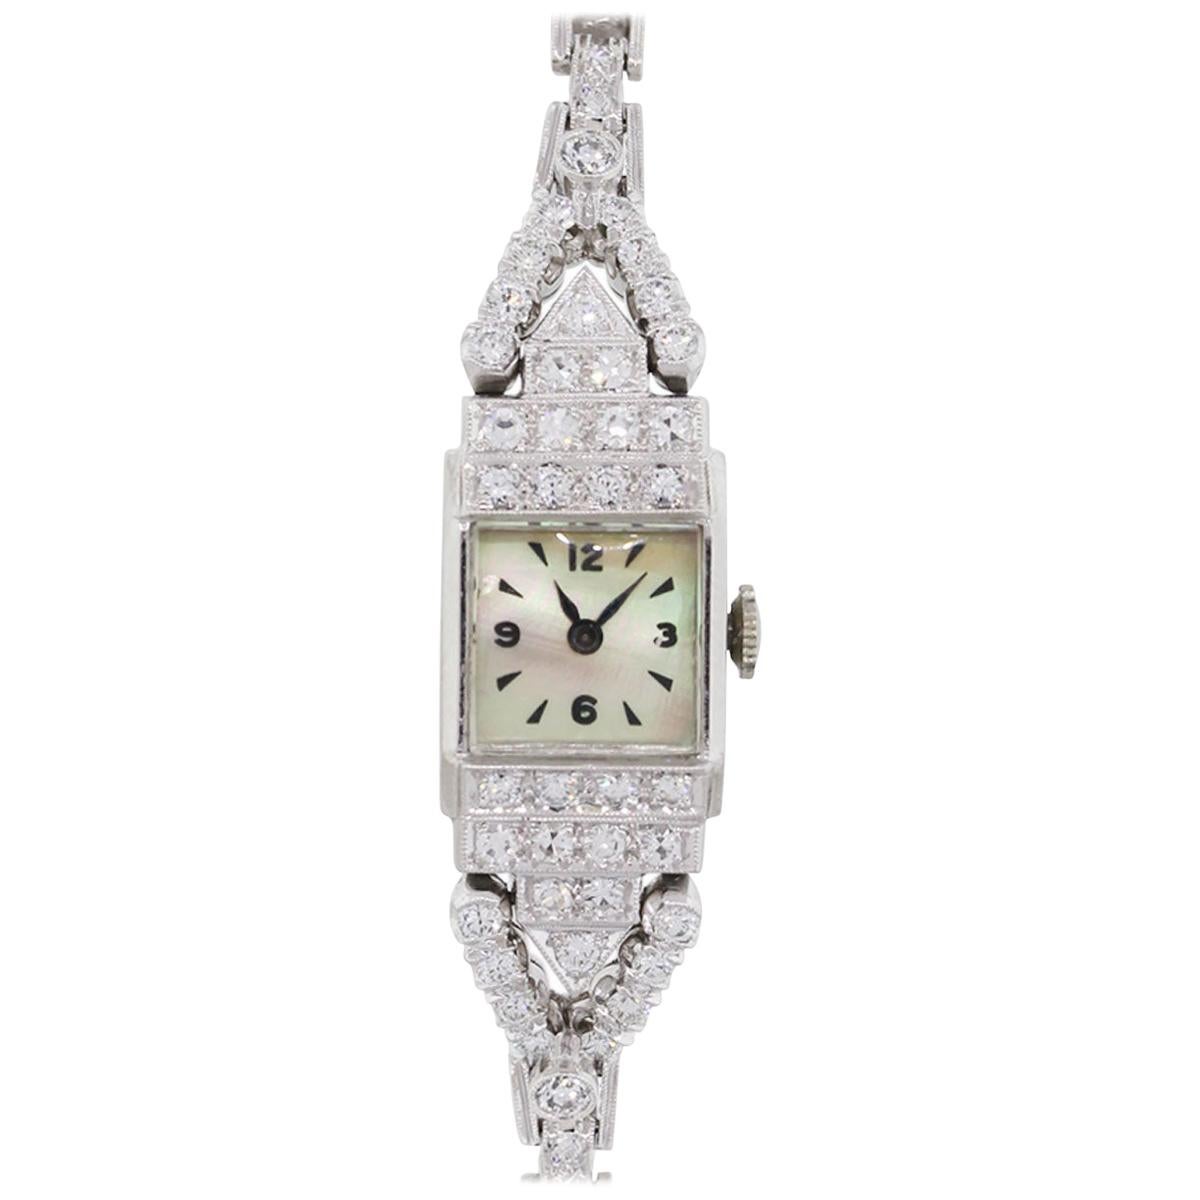 Diamond and Mother of Pearl Dial Antique Wristwatch